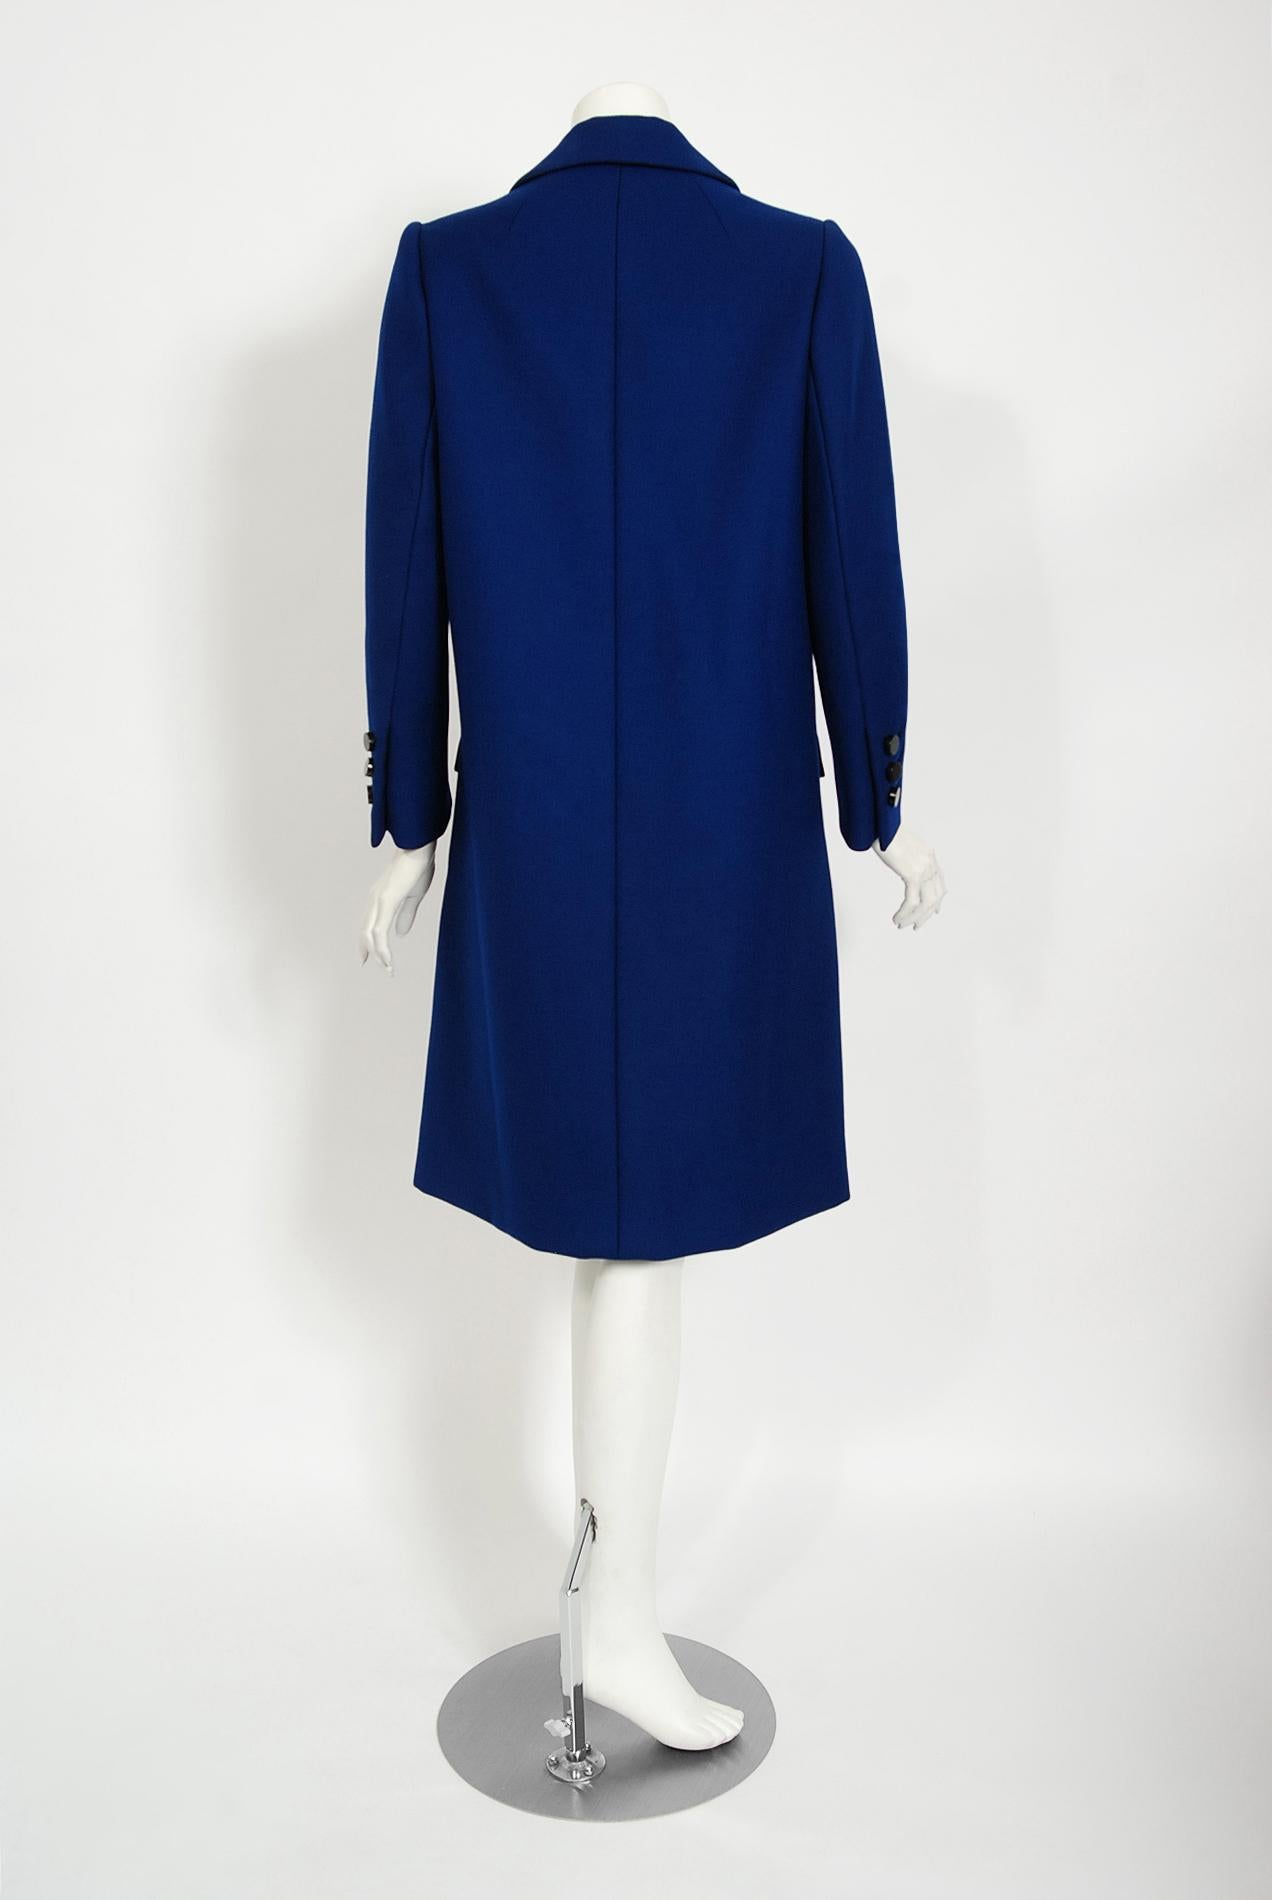 Vintage 1969 Norman Norell Royal Blue Wool Double-Breasted Mod Military Coat For Sale 1